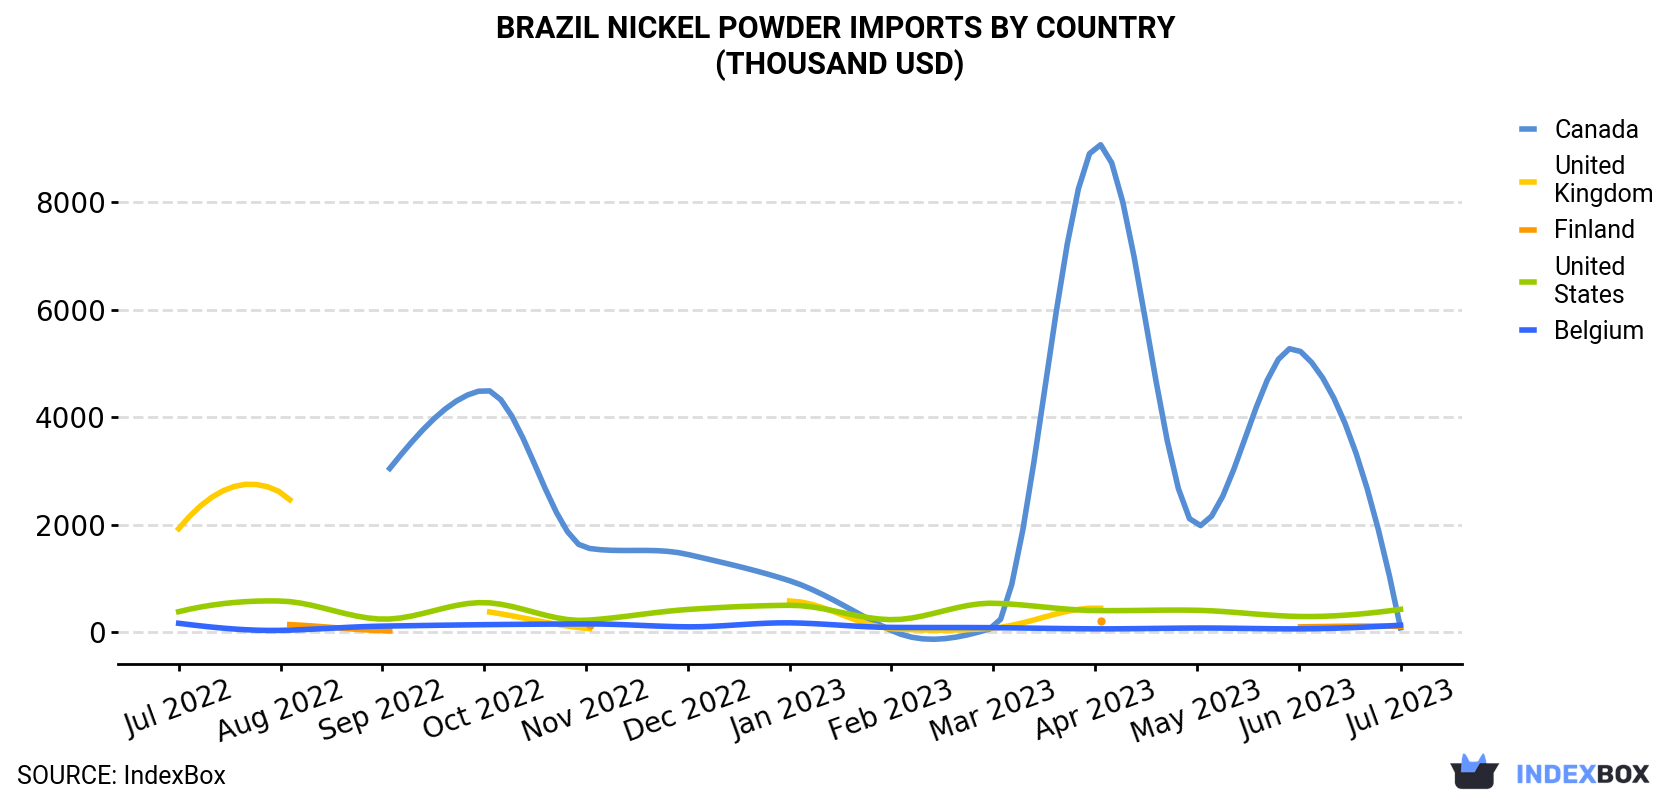 Brazil Nickel Powder Imports By Country (Thousand USD)